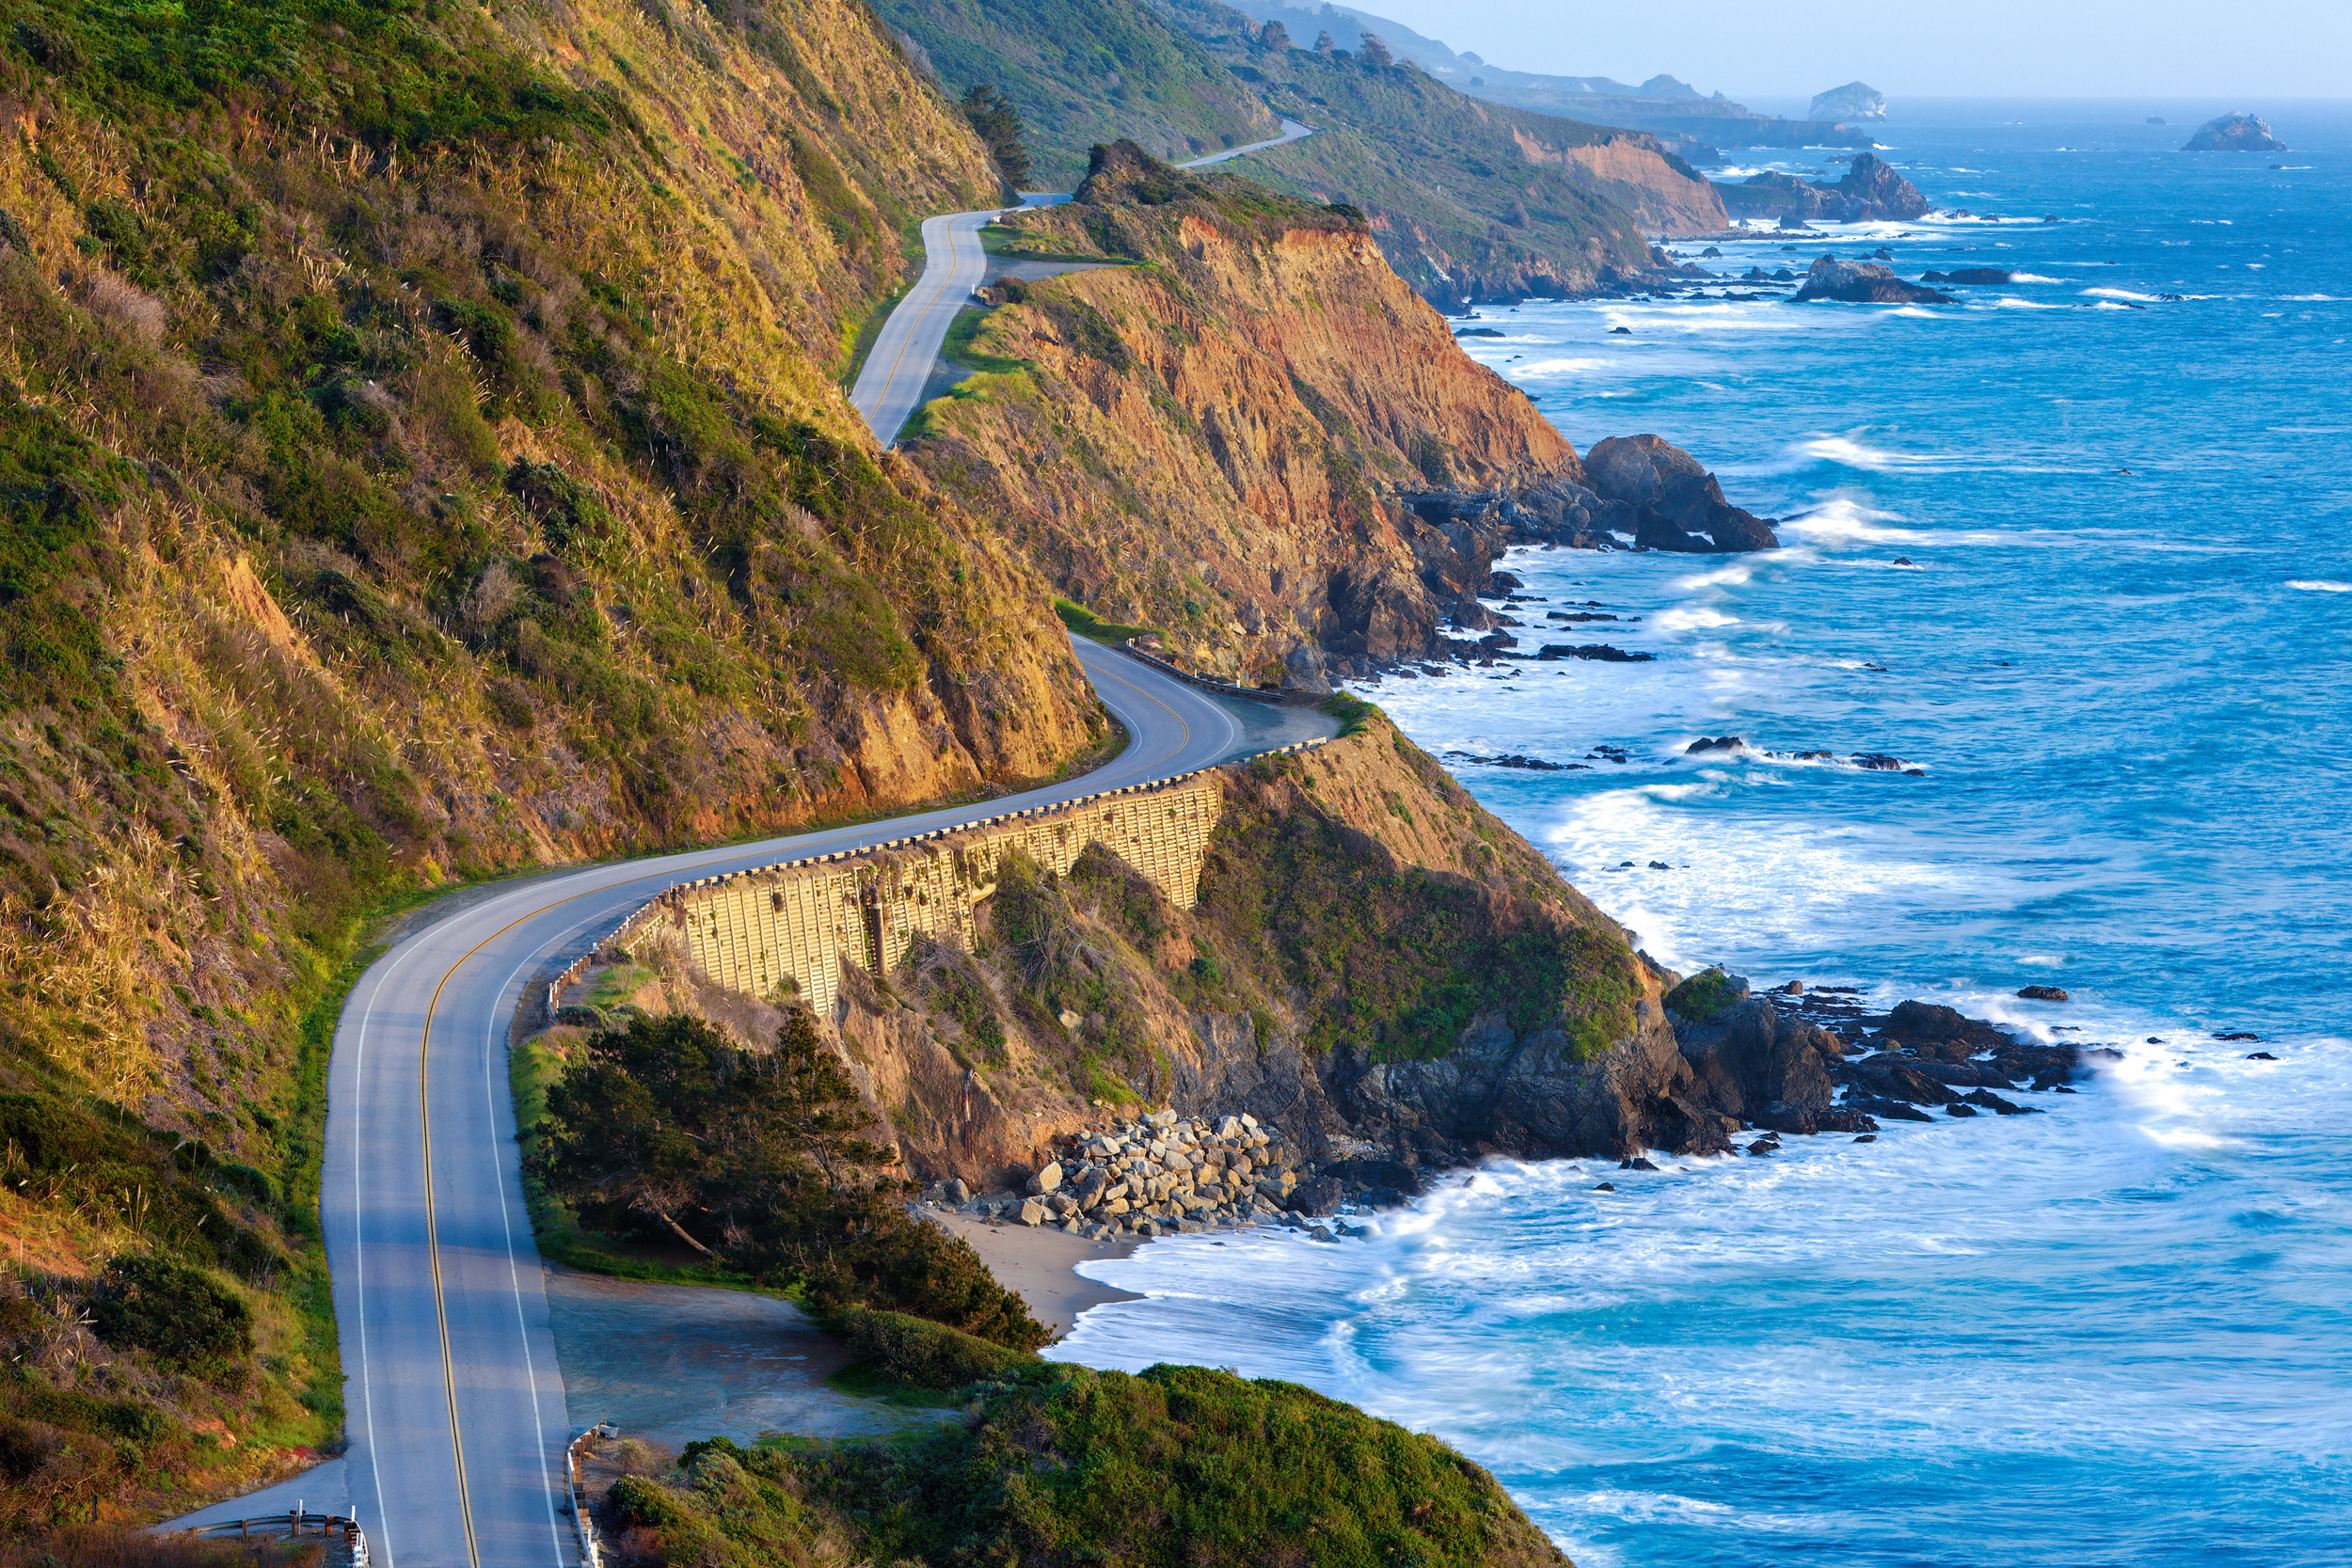 <p>A West Coast road trip is one of those quintessential trips everyone needs to take at least once. From alpine mountains to the Pacific coast and numerous deserts, forests, and wonderful cities in between, here are 10 of the best road trips on the West Coast.</p>